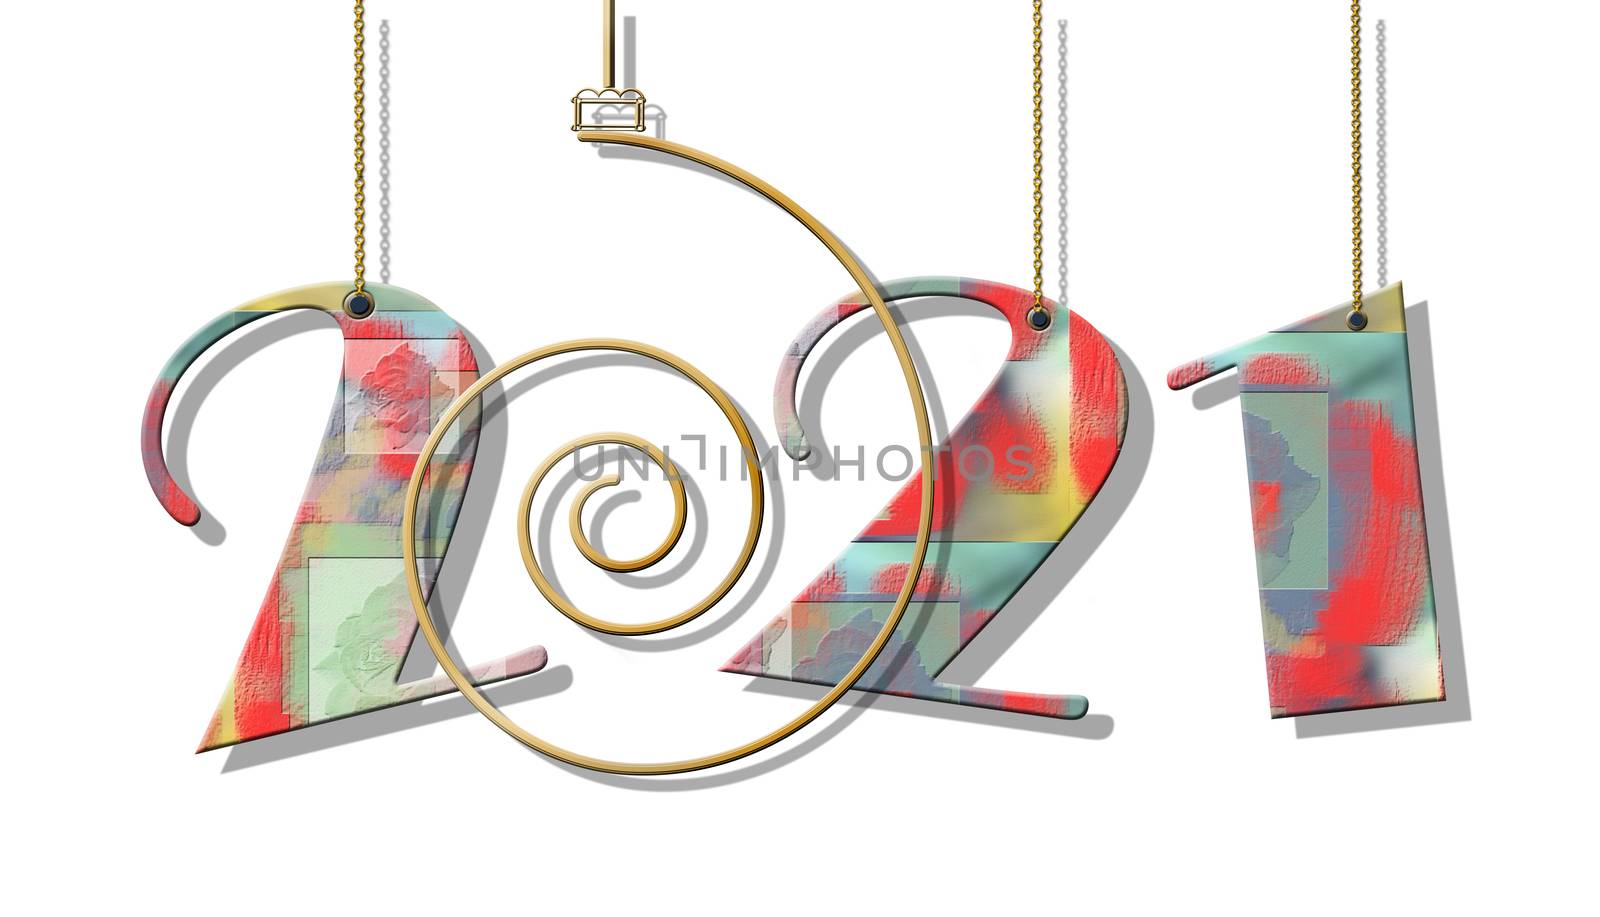 Hanging 2021 new year numbers with gradient green red colour on white background. Copy space. 3D illustrartion